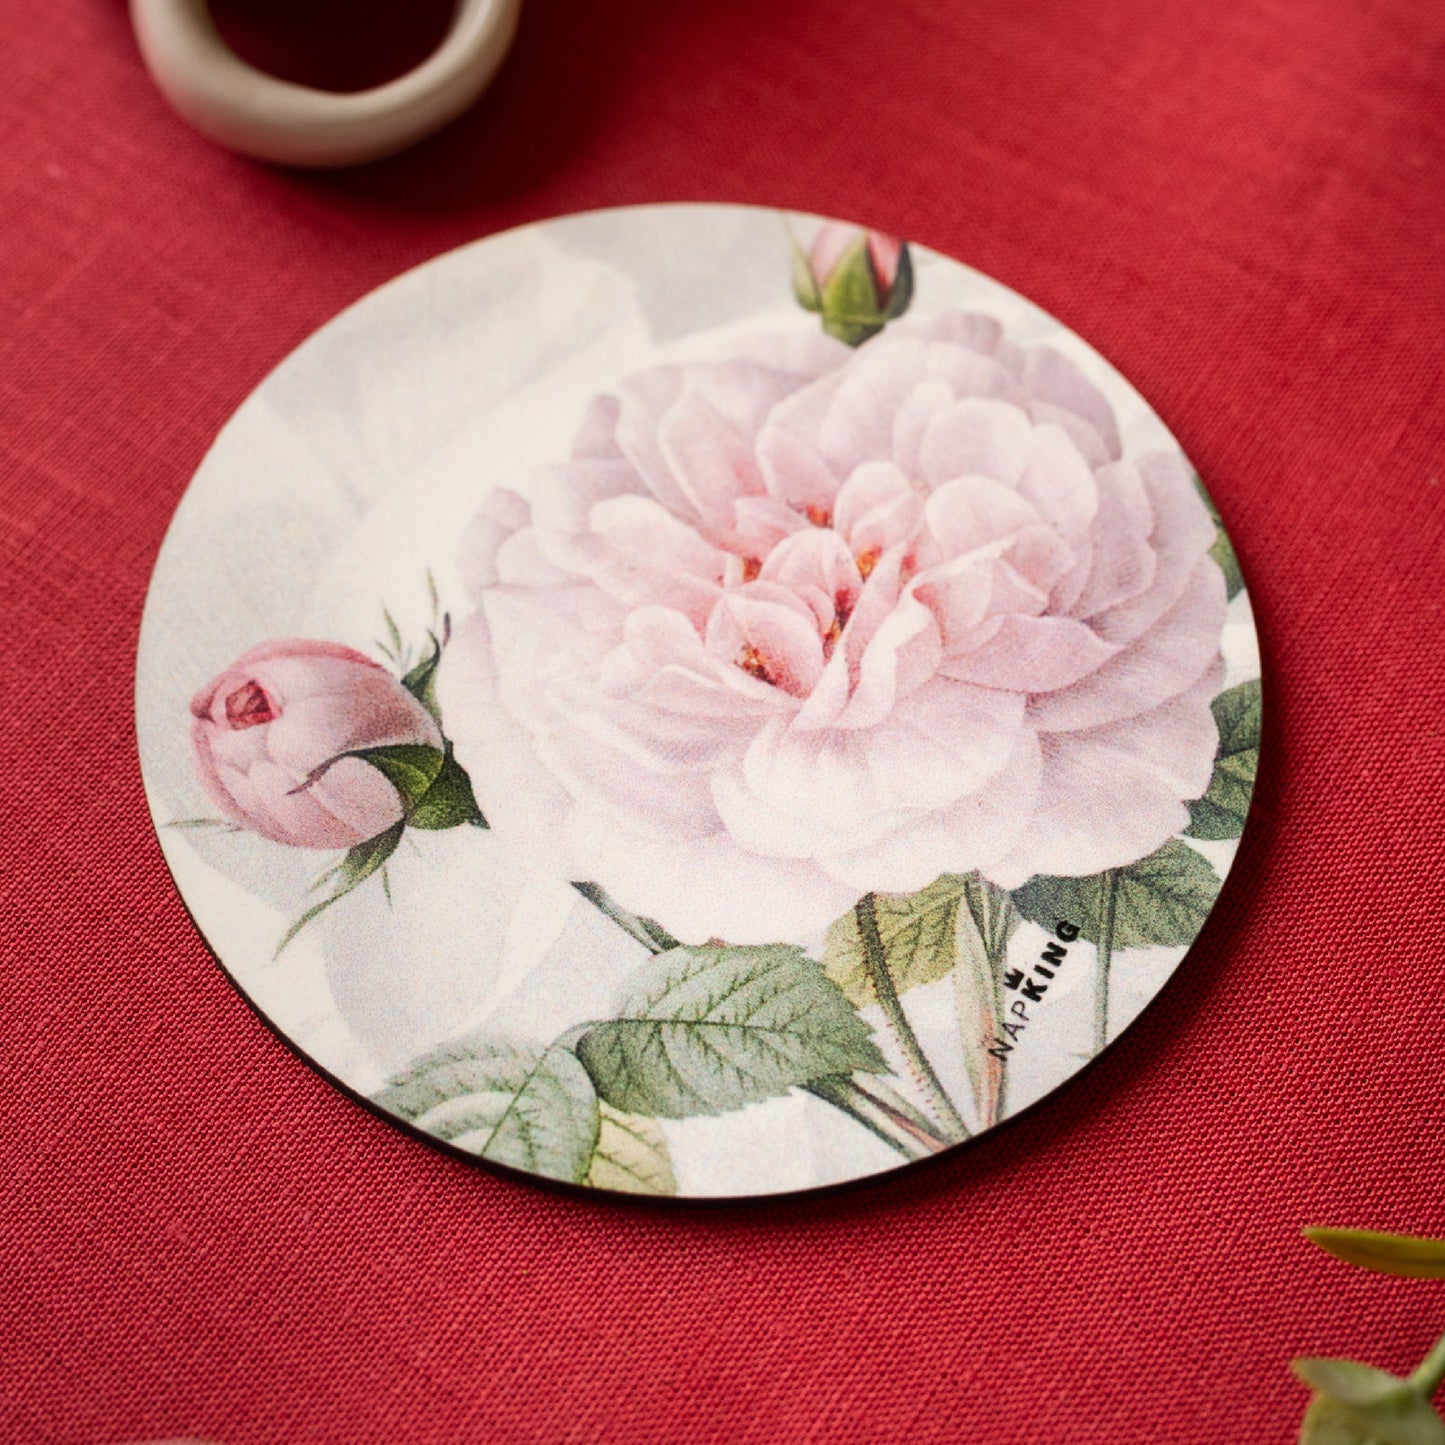 Set of 2 coasters  "Roses" wood and cork